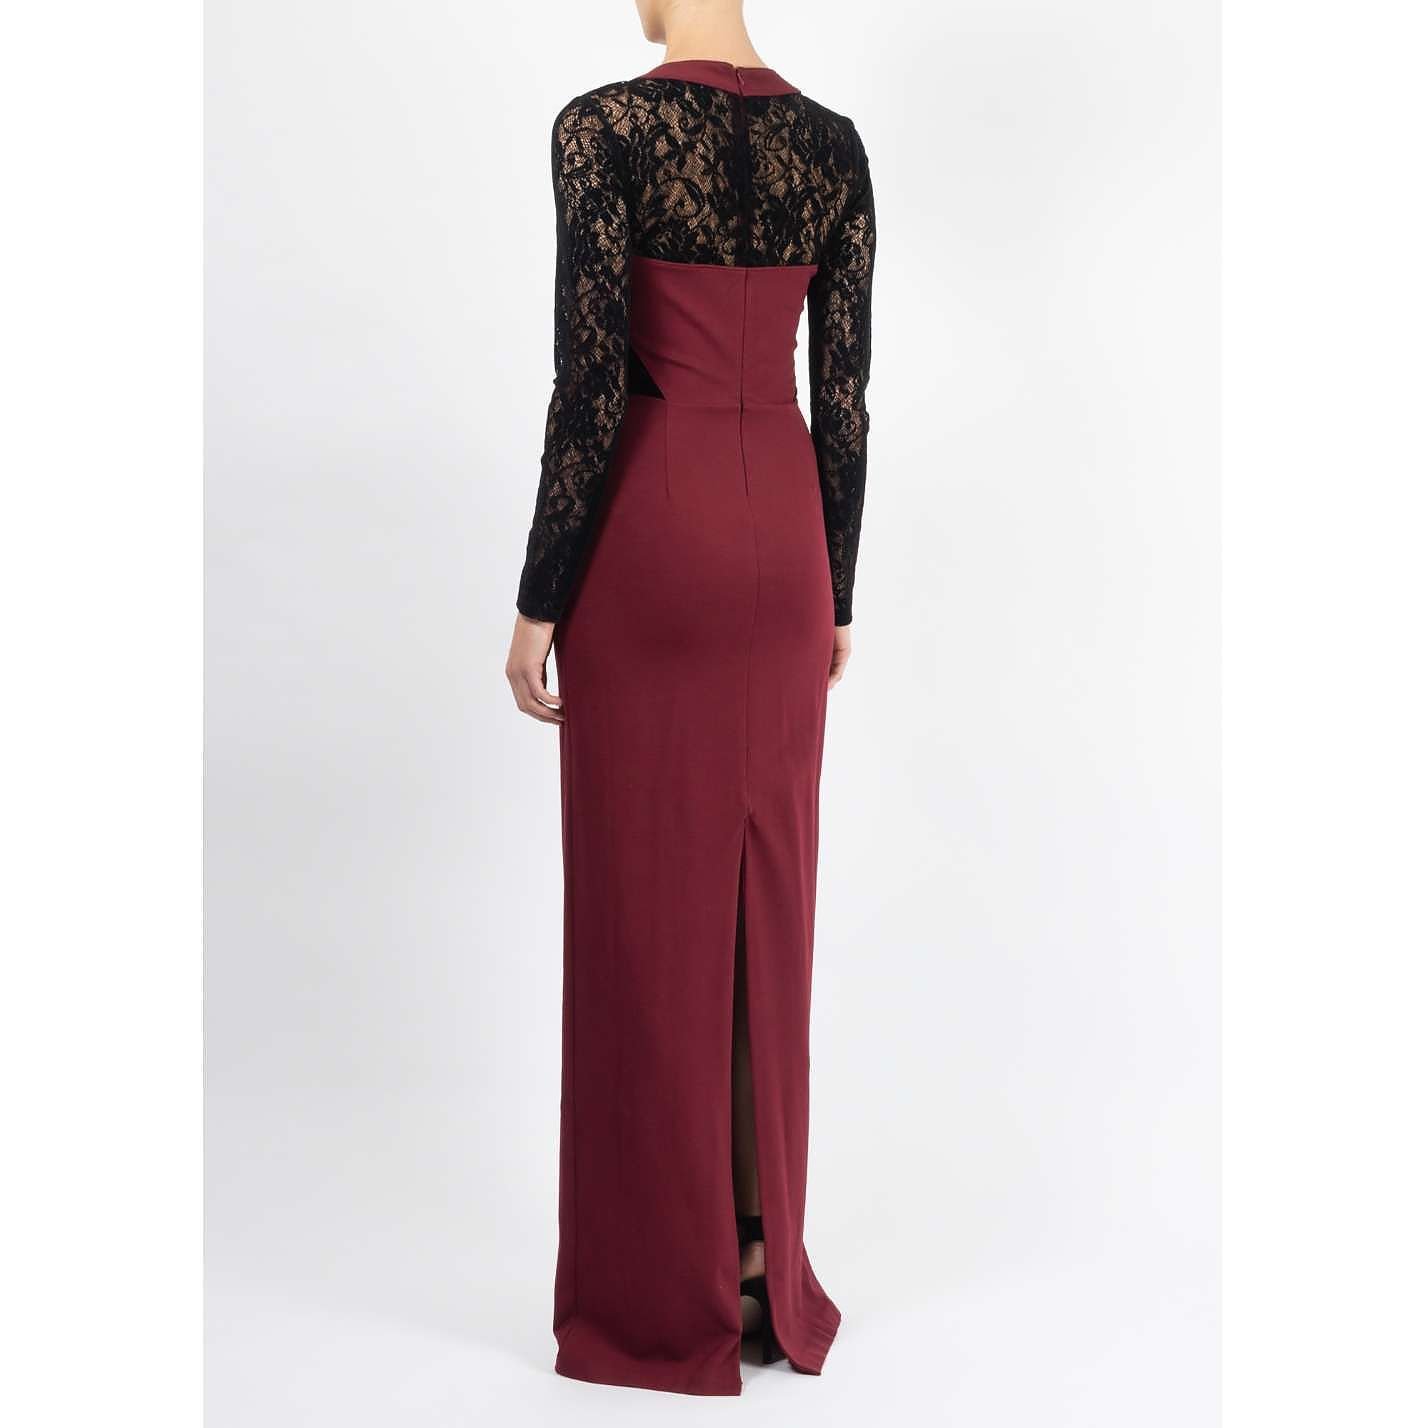 Temperley London Lace Detail Gown